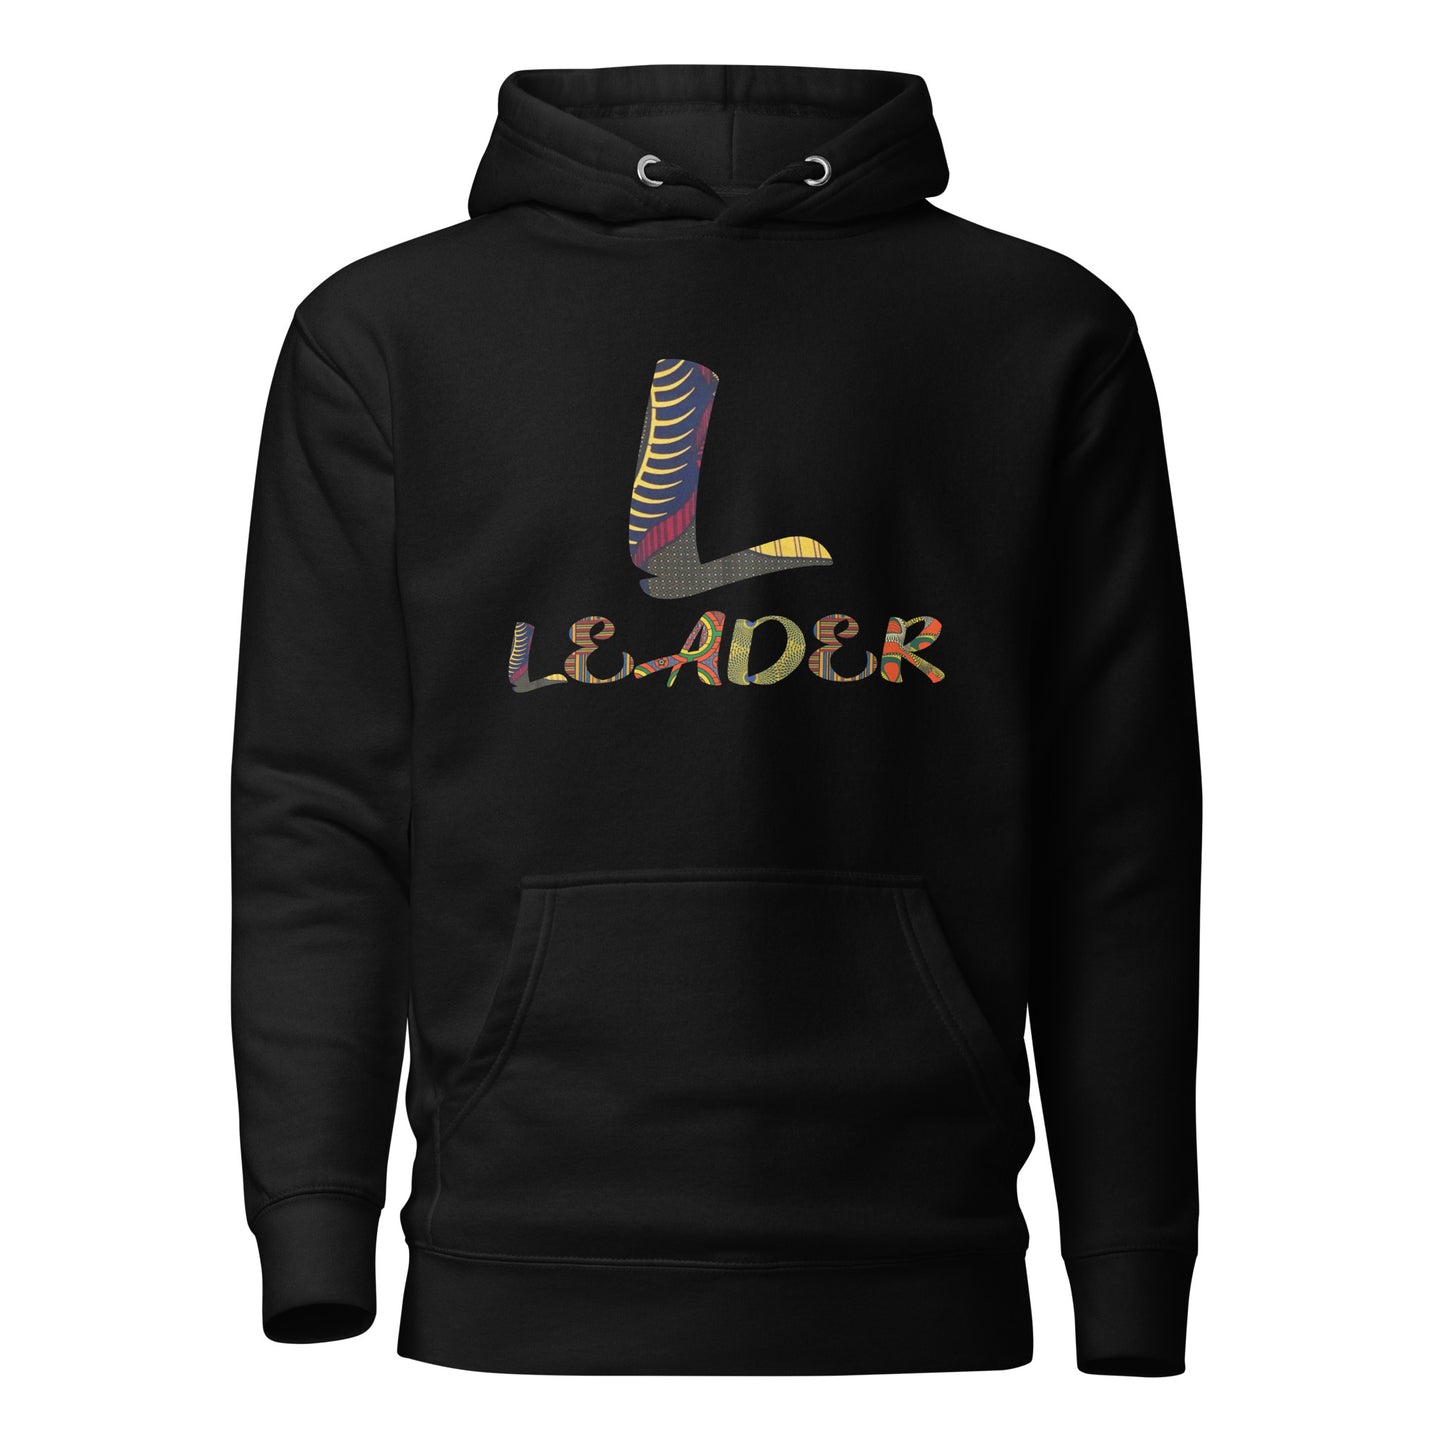 L For Leader Unisex Afro Graphic Hoodie